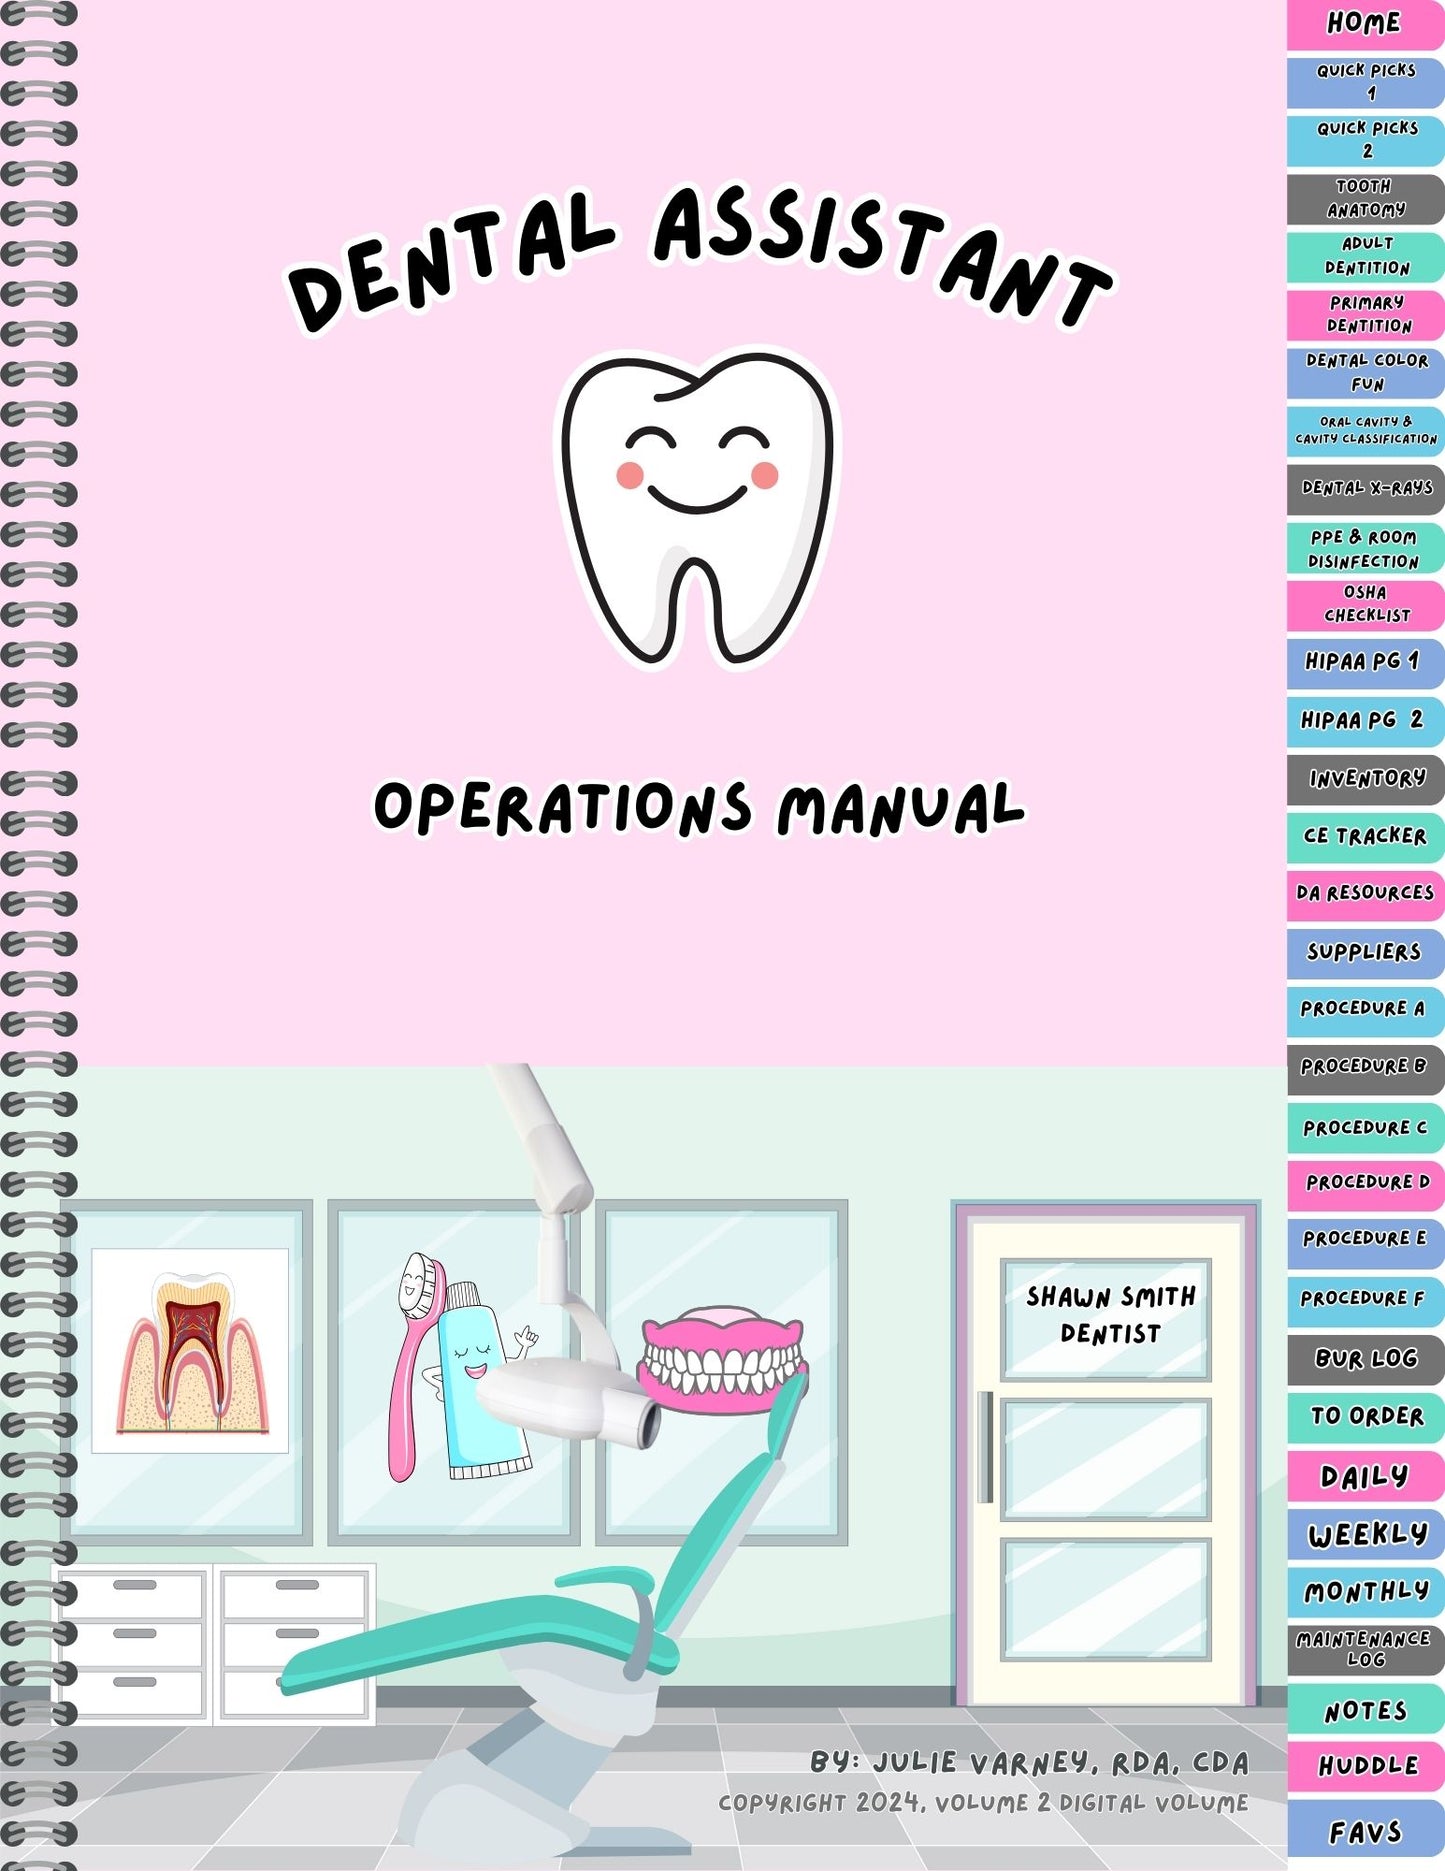 Dental Assistant Manual for Chairside: Use with Goodnotes or Keynote Download